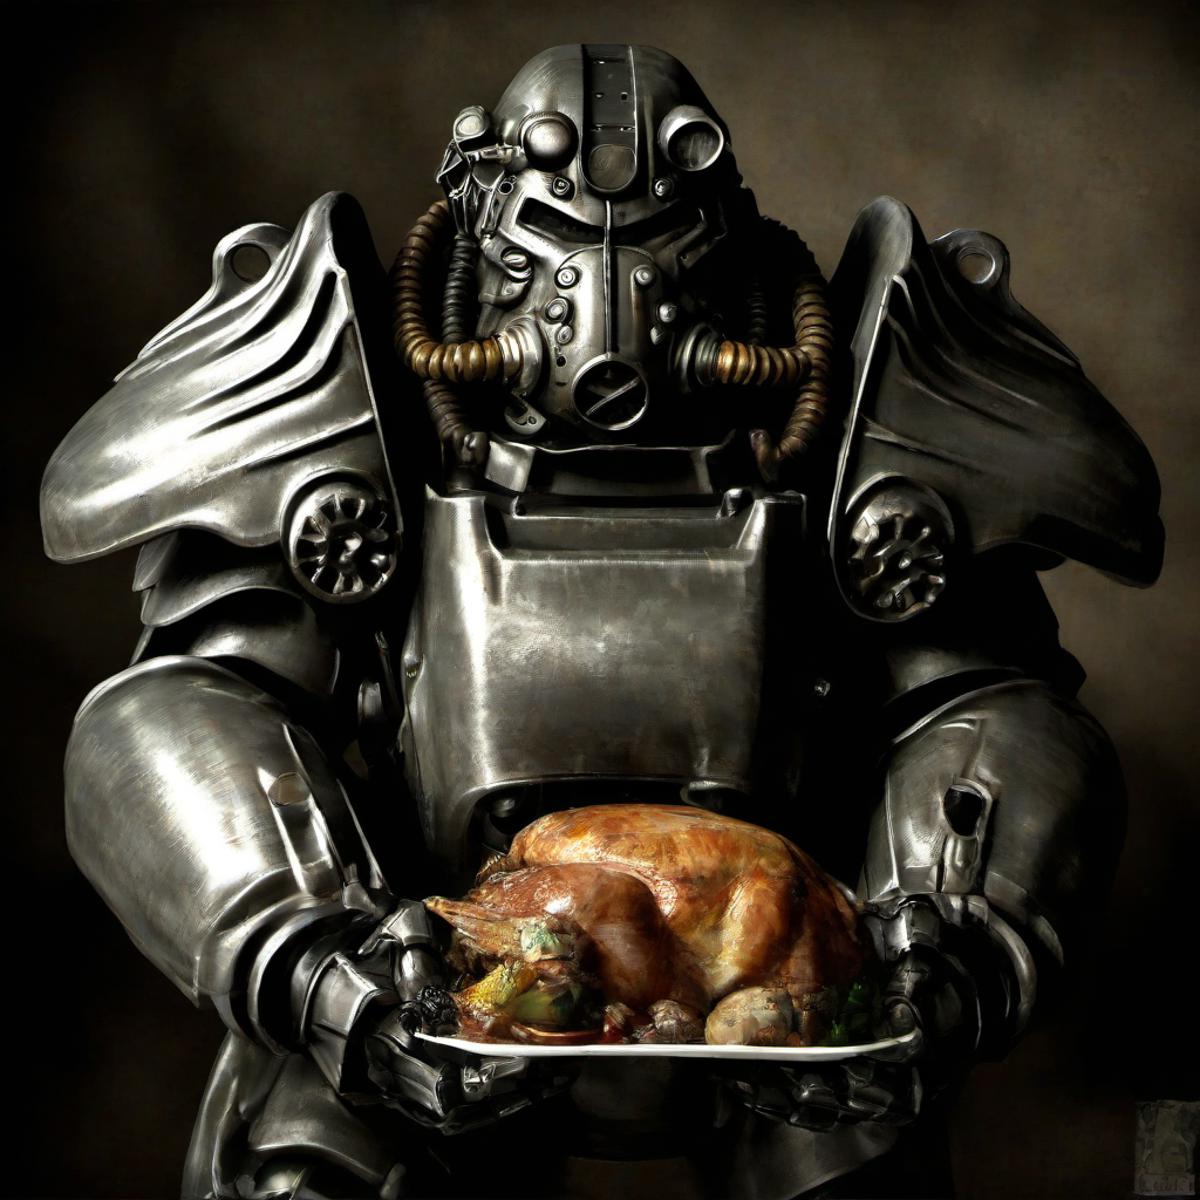 Robot holding a plate with a turkey on it.